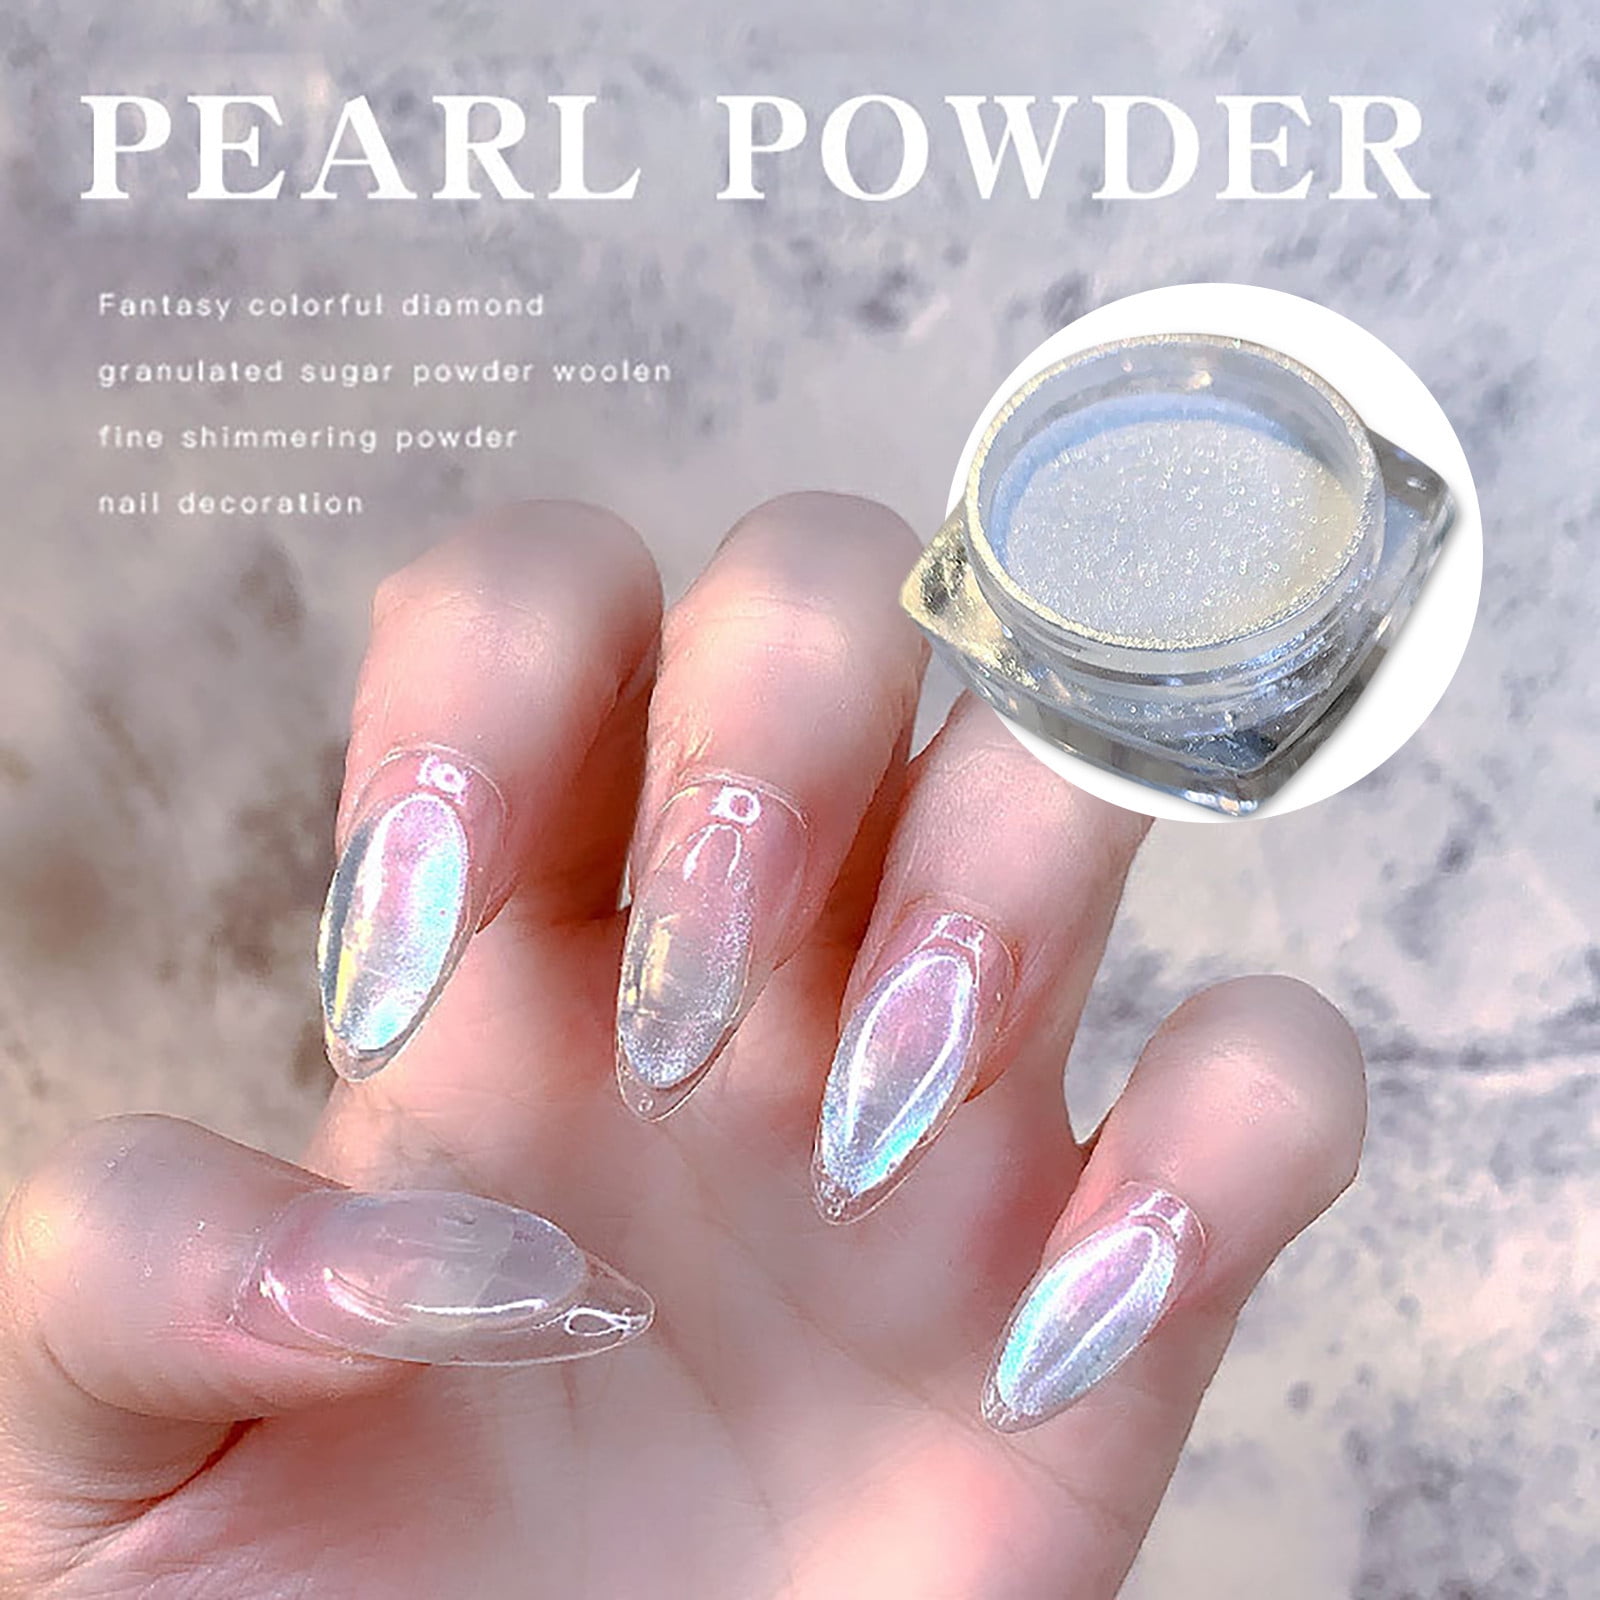 Holographic Micro Powder Candy Nail Art Ombre Glitter Mixed Sugar